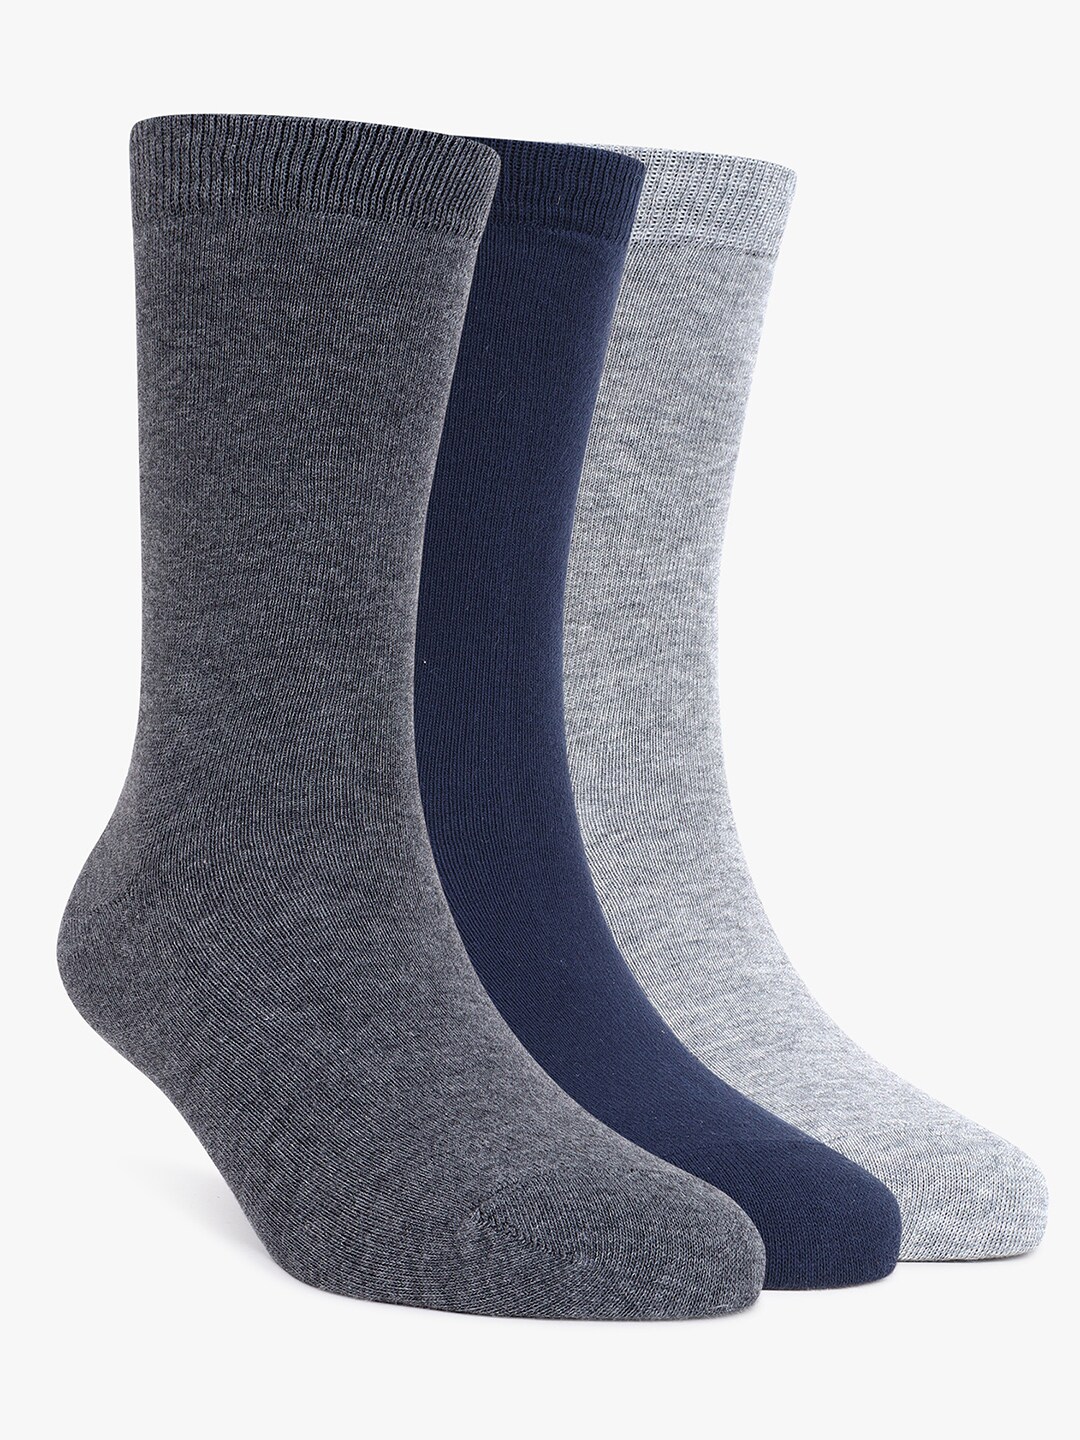 

TOFFCRAFT Men Pack Of 3 Cotton Anti-Odour Calf Length Socks, Charcoal